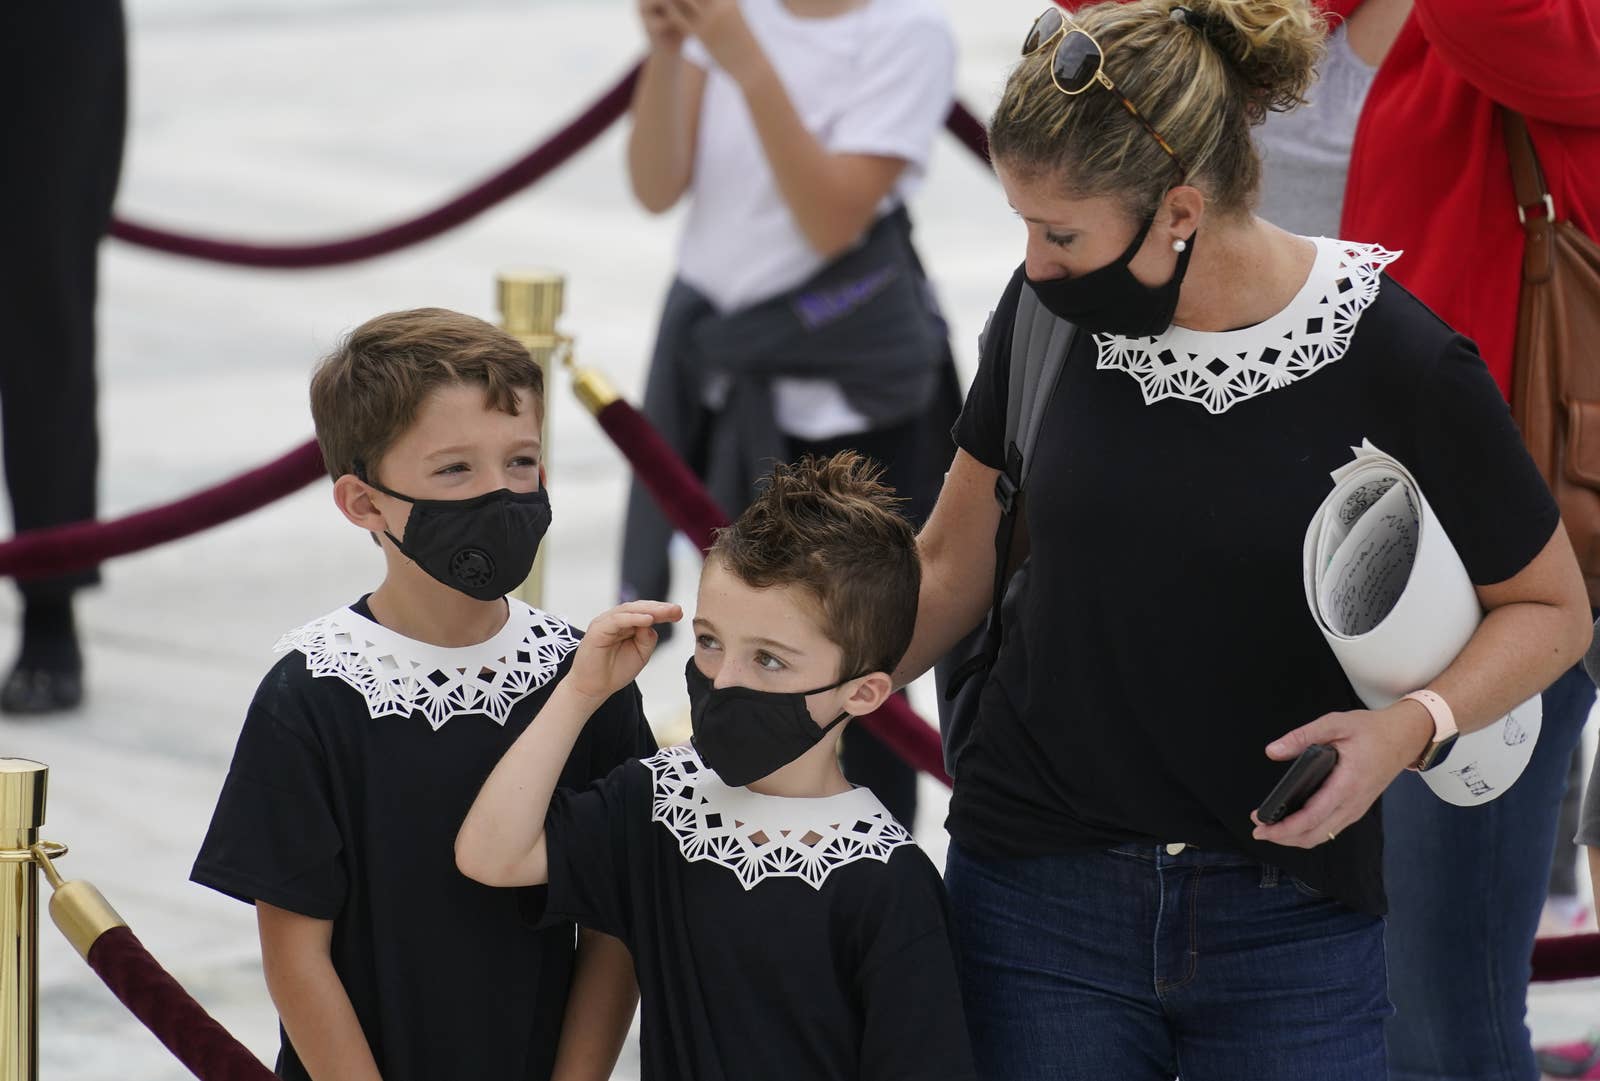 Two boys wearing lace collars salute next to their mom who is also wearing a lace collar